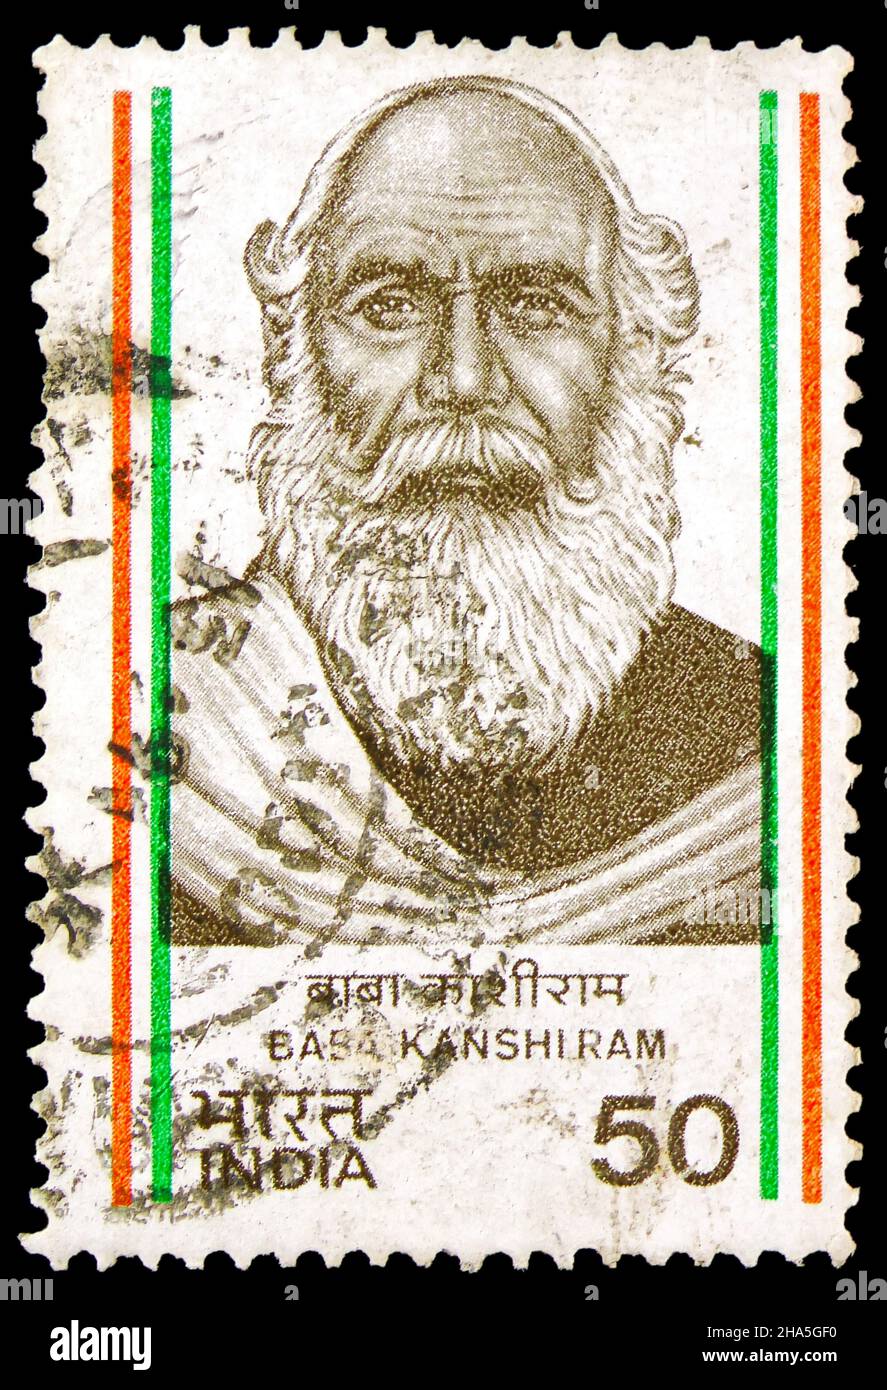 MOSCOW, RUSSIA - NOVEMBER 4, 2021: Postage stamp printed in India shows Baba Kanshi Ram (1882-1943), India Struggle for Freedom serie, circa 1984 Stock Photo